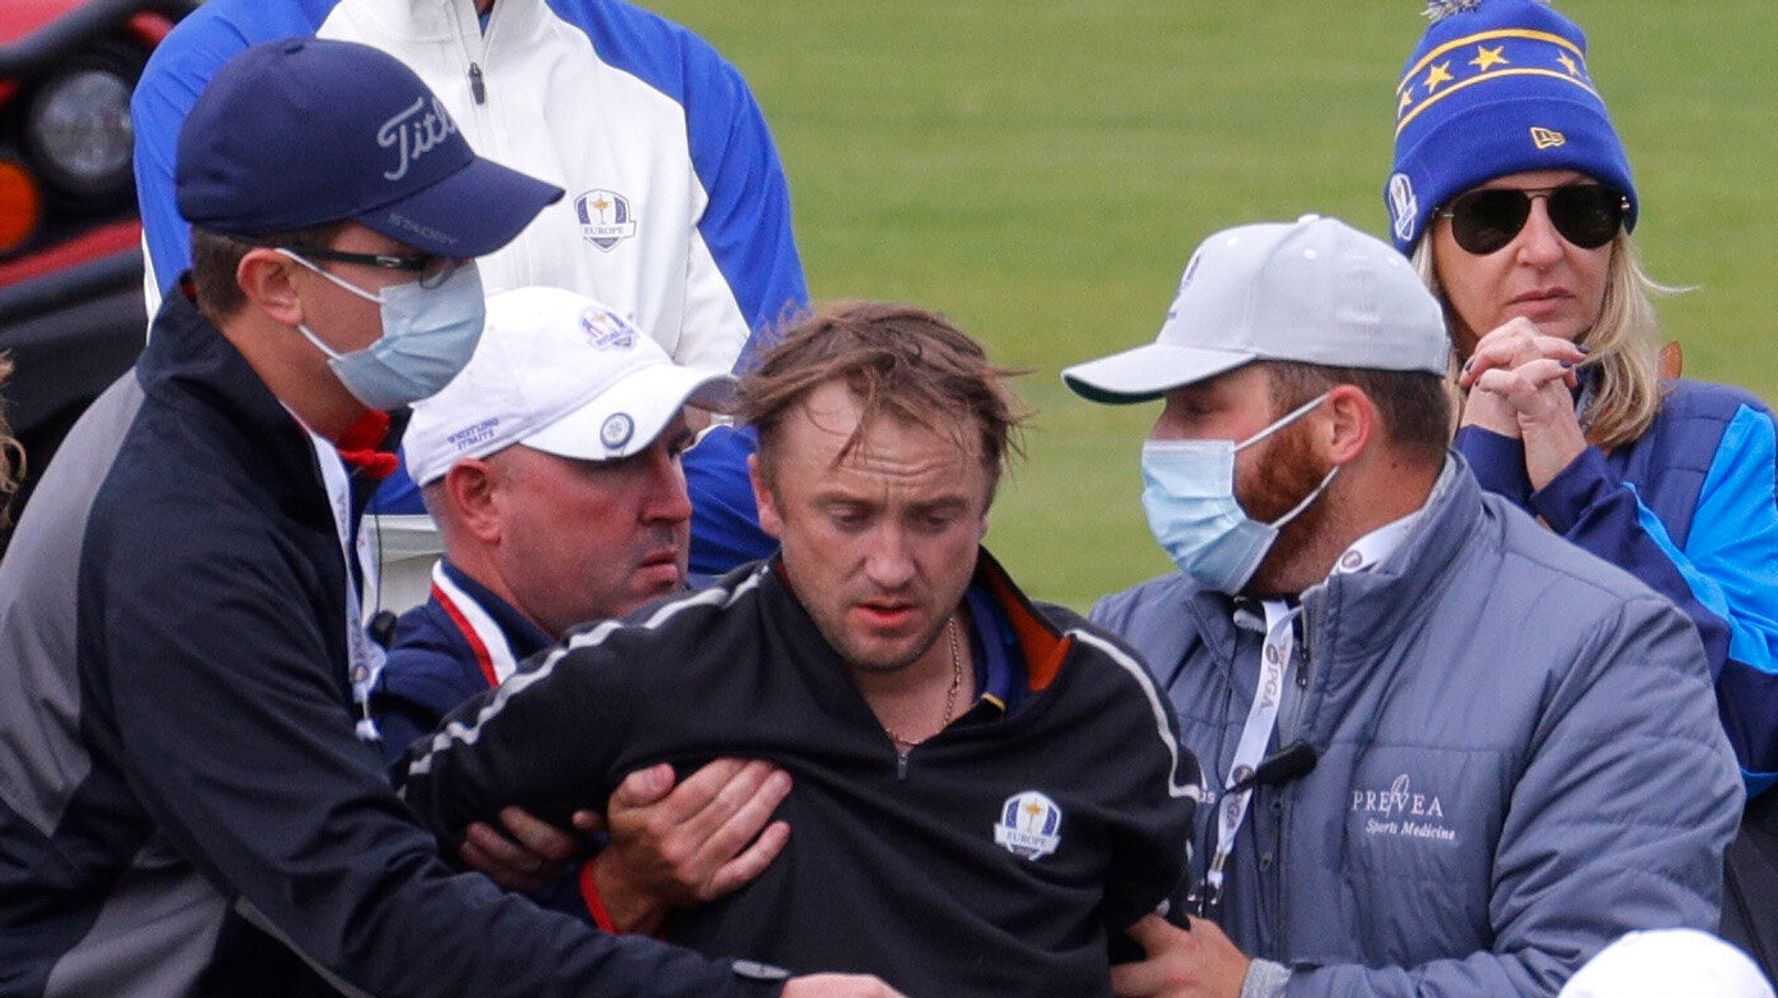 Draco Malfoy Actor Tom Felton Collapses At Ryder Cup Celebrity Golf Match In Wisconsin - HuffPost